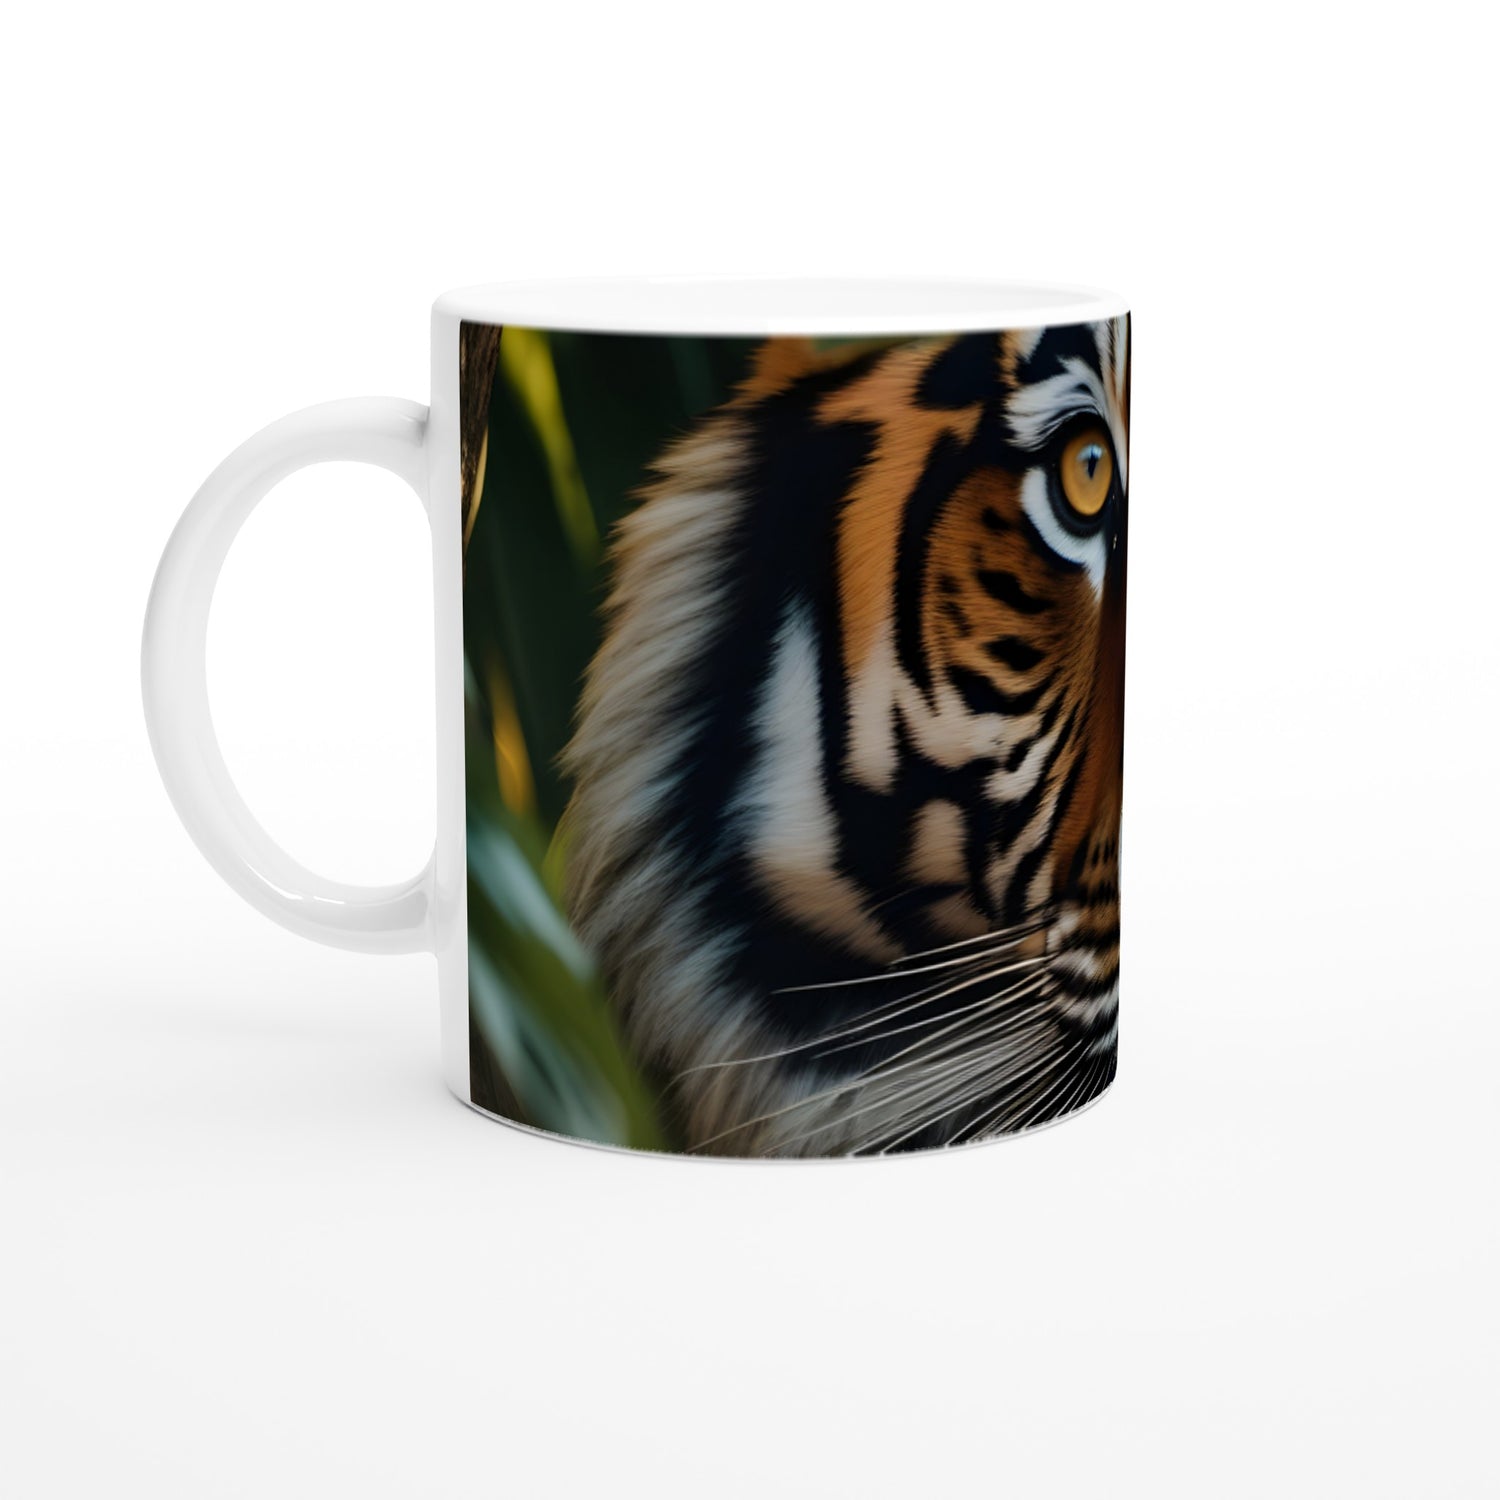 Cup Printed on Tiger